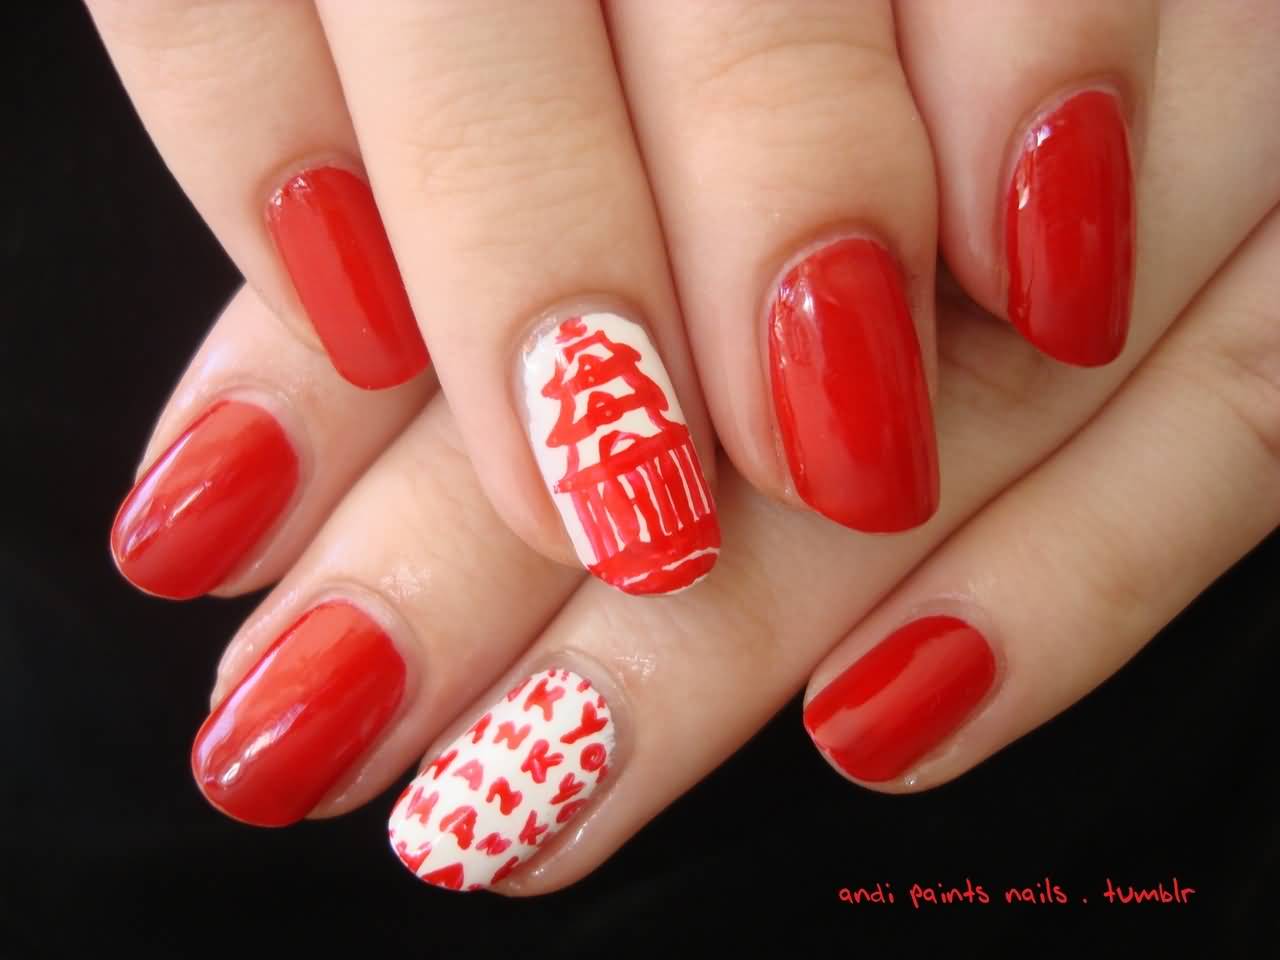 Adorable Red Chinese Nail Art Design Idea